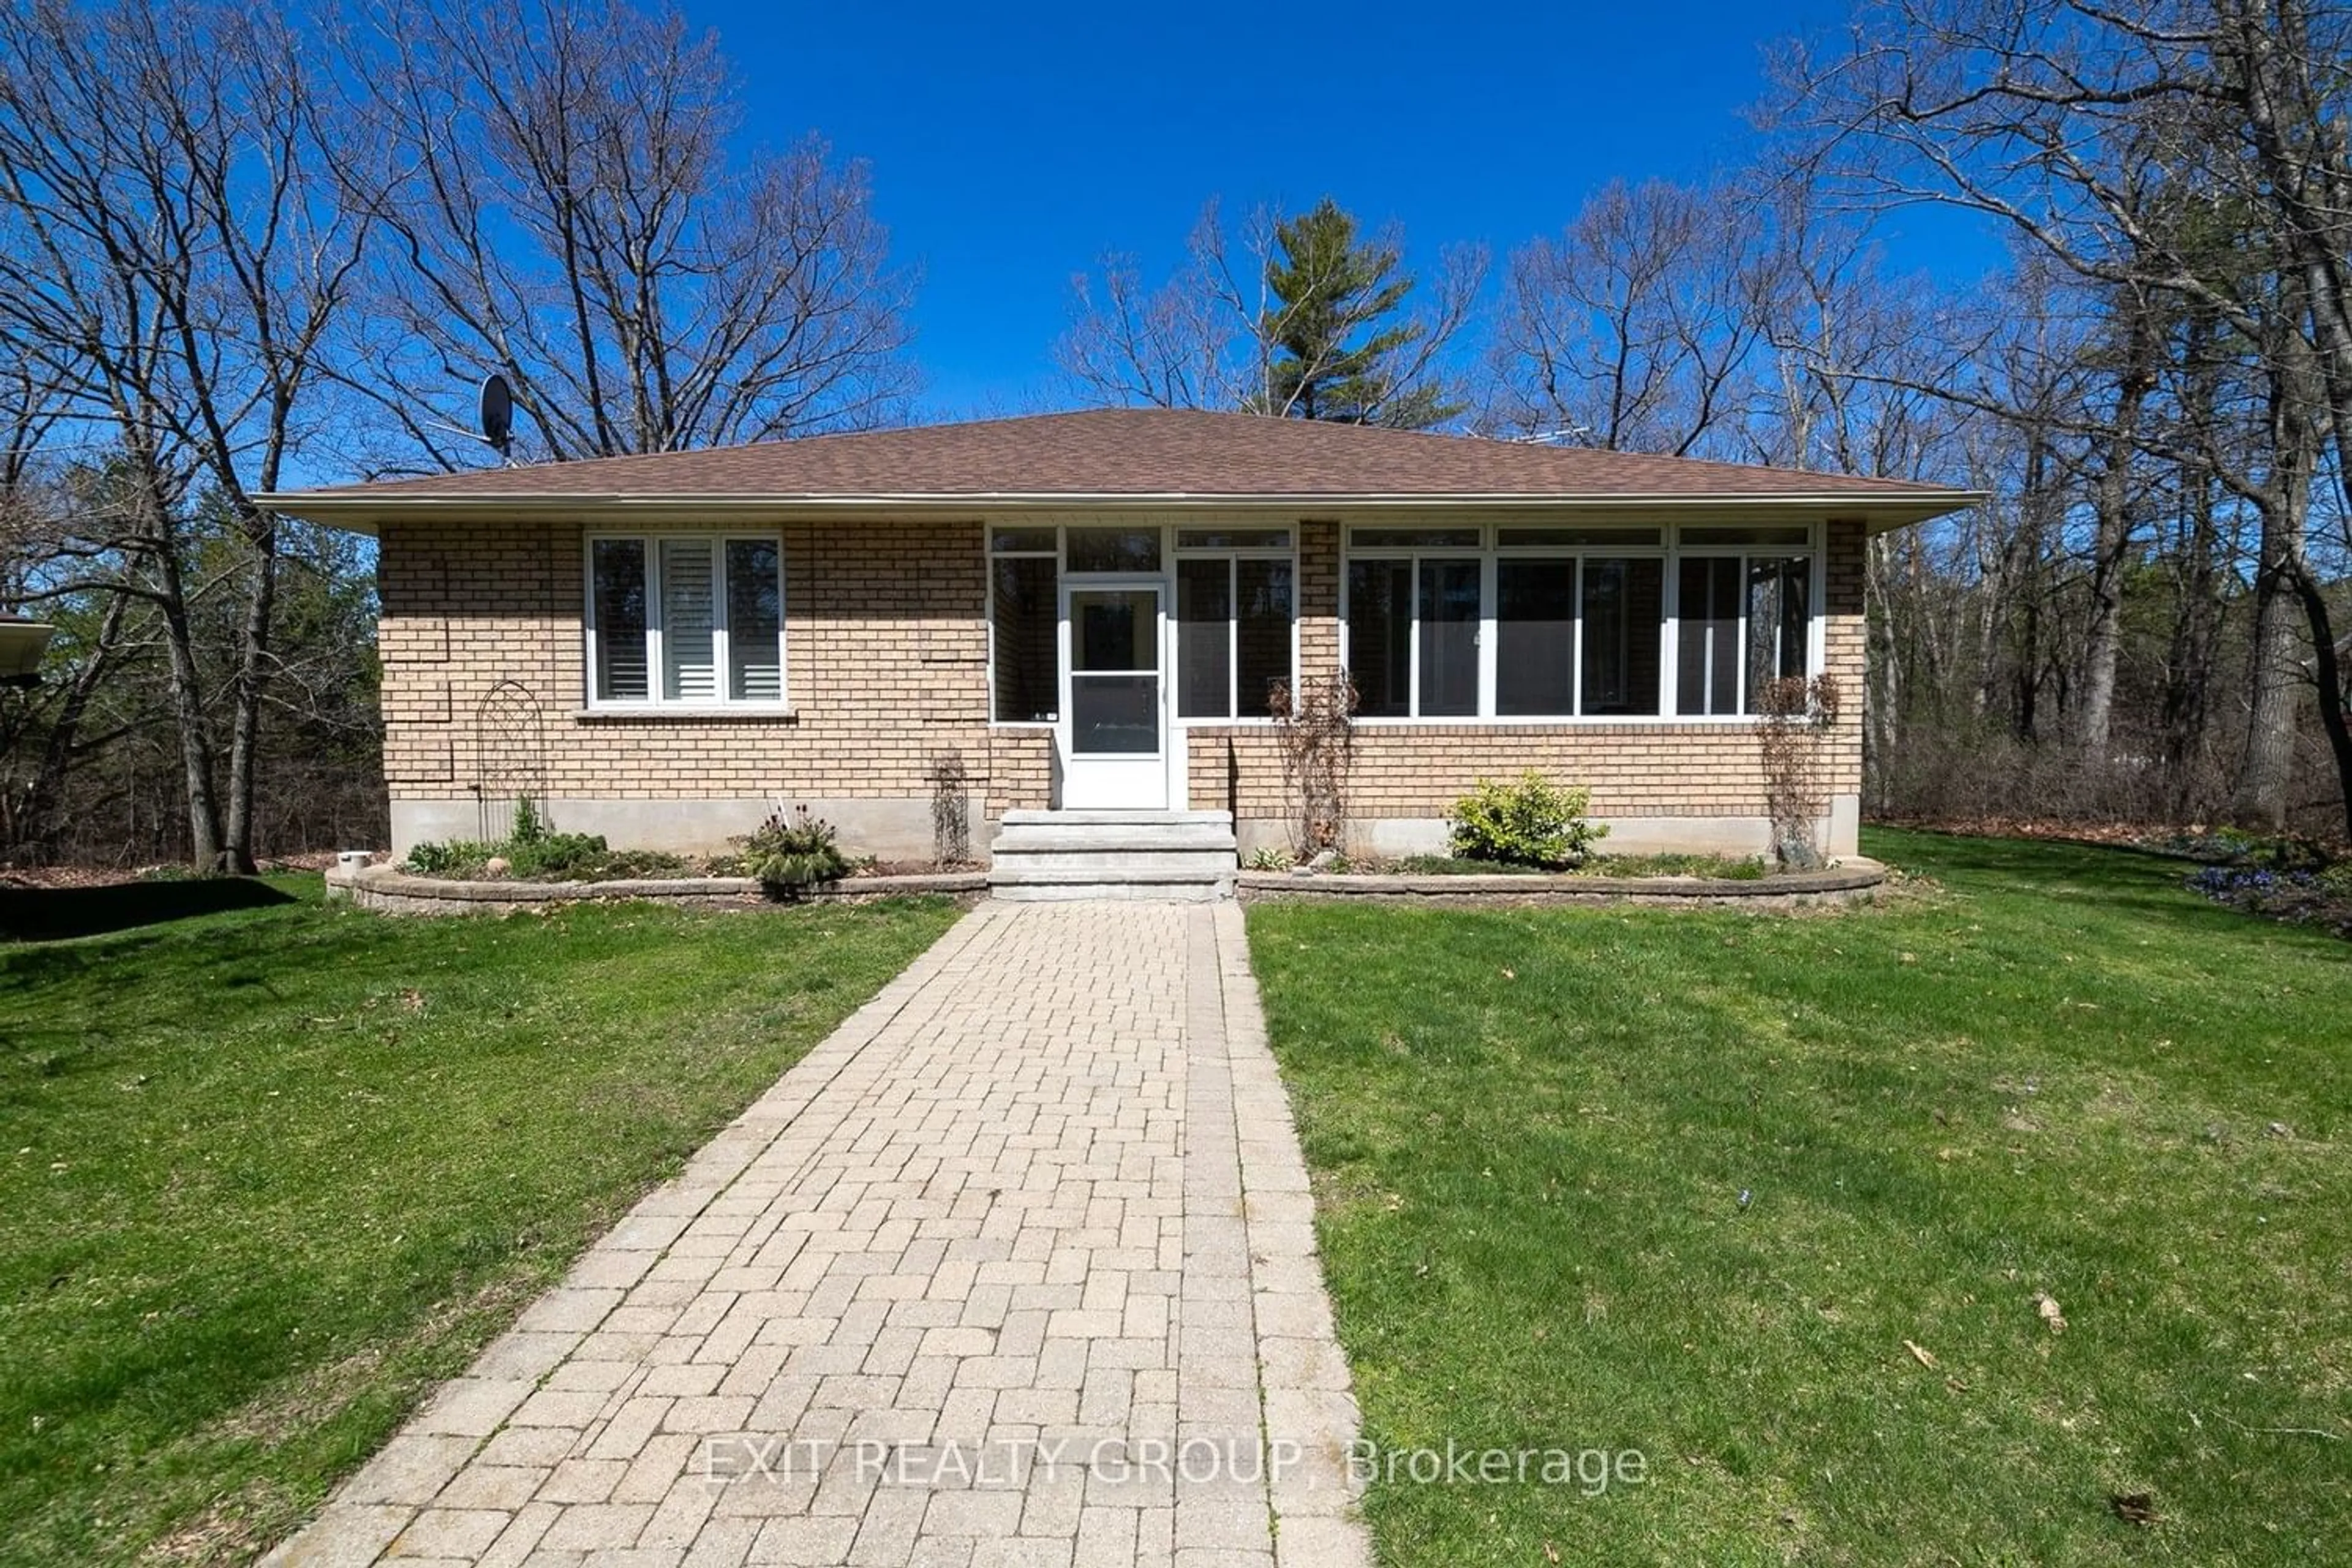 Home with brick exterior material for 256 Hearns Rd, Quinte West Ontario K0K 2C0